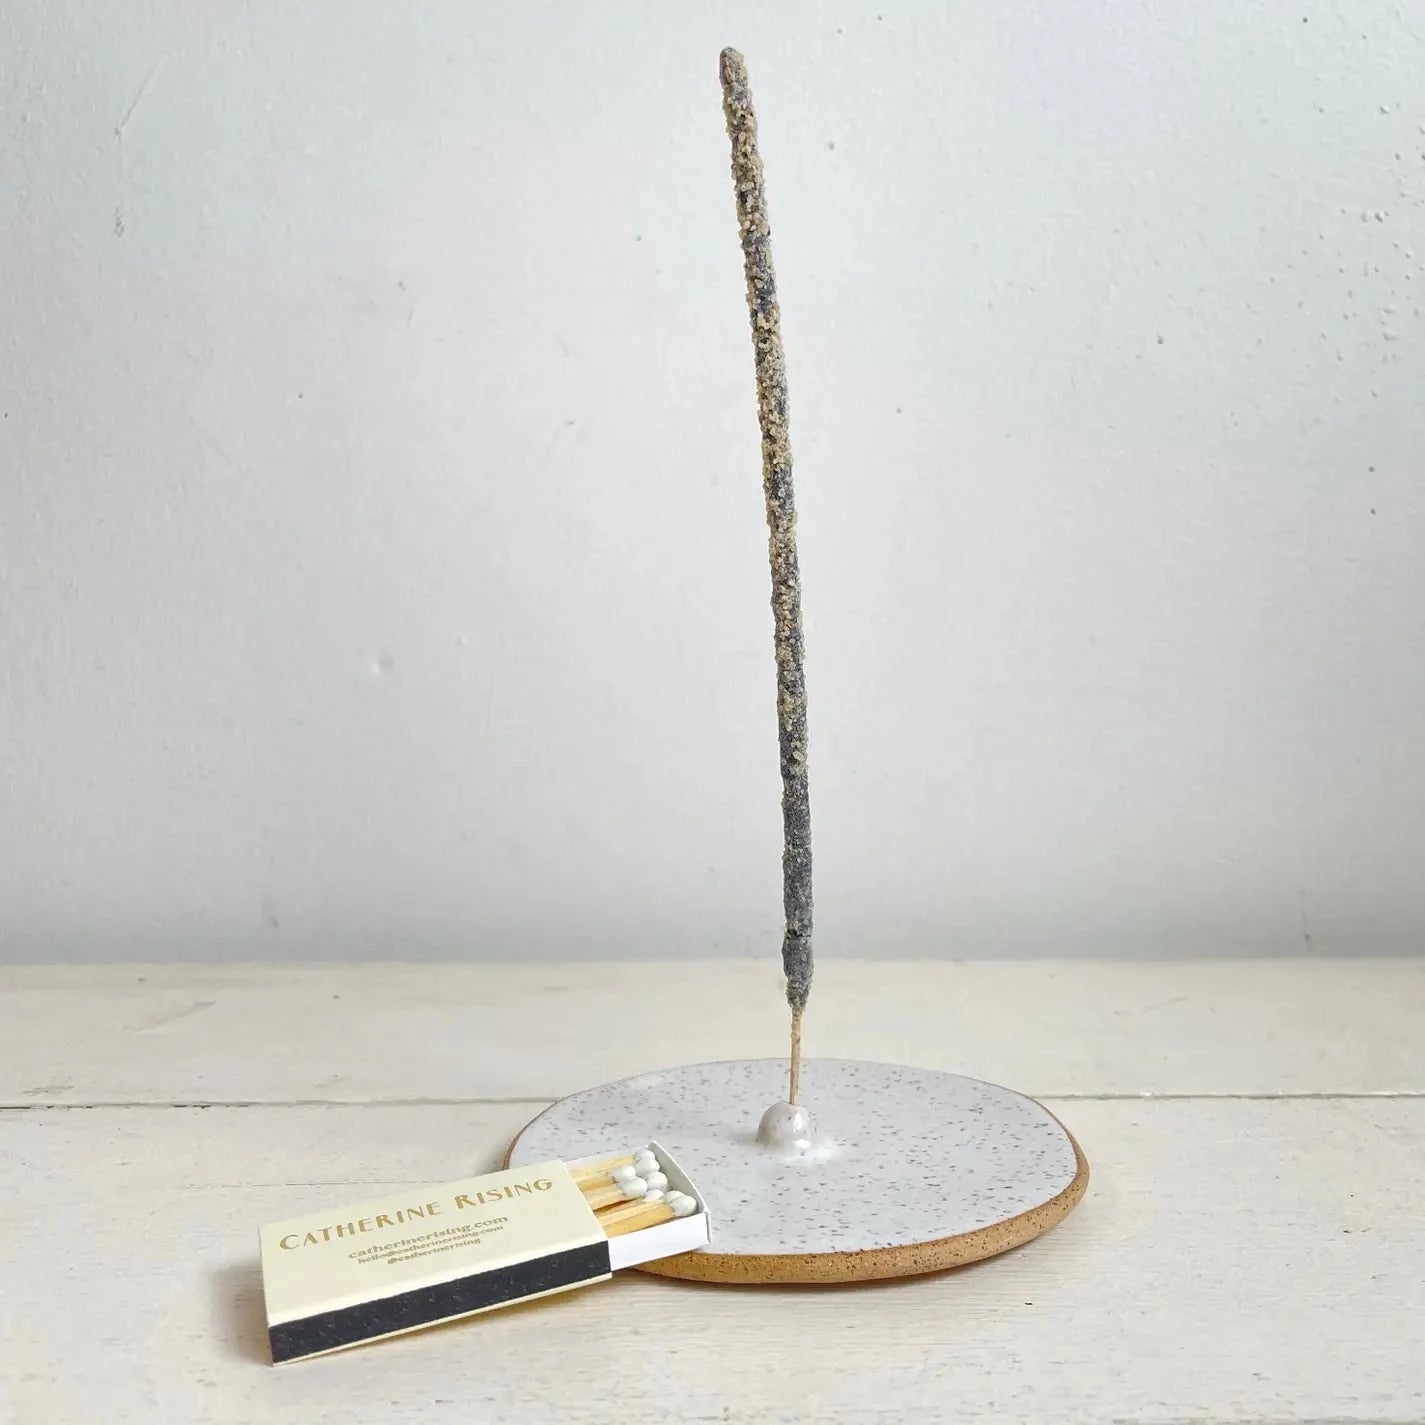 Catherine Rising Ceramic Incense Holder| Prelude and Dawn | Los Angeles, CA